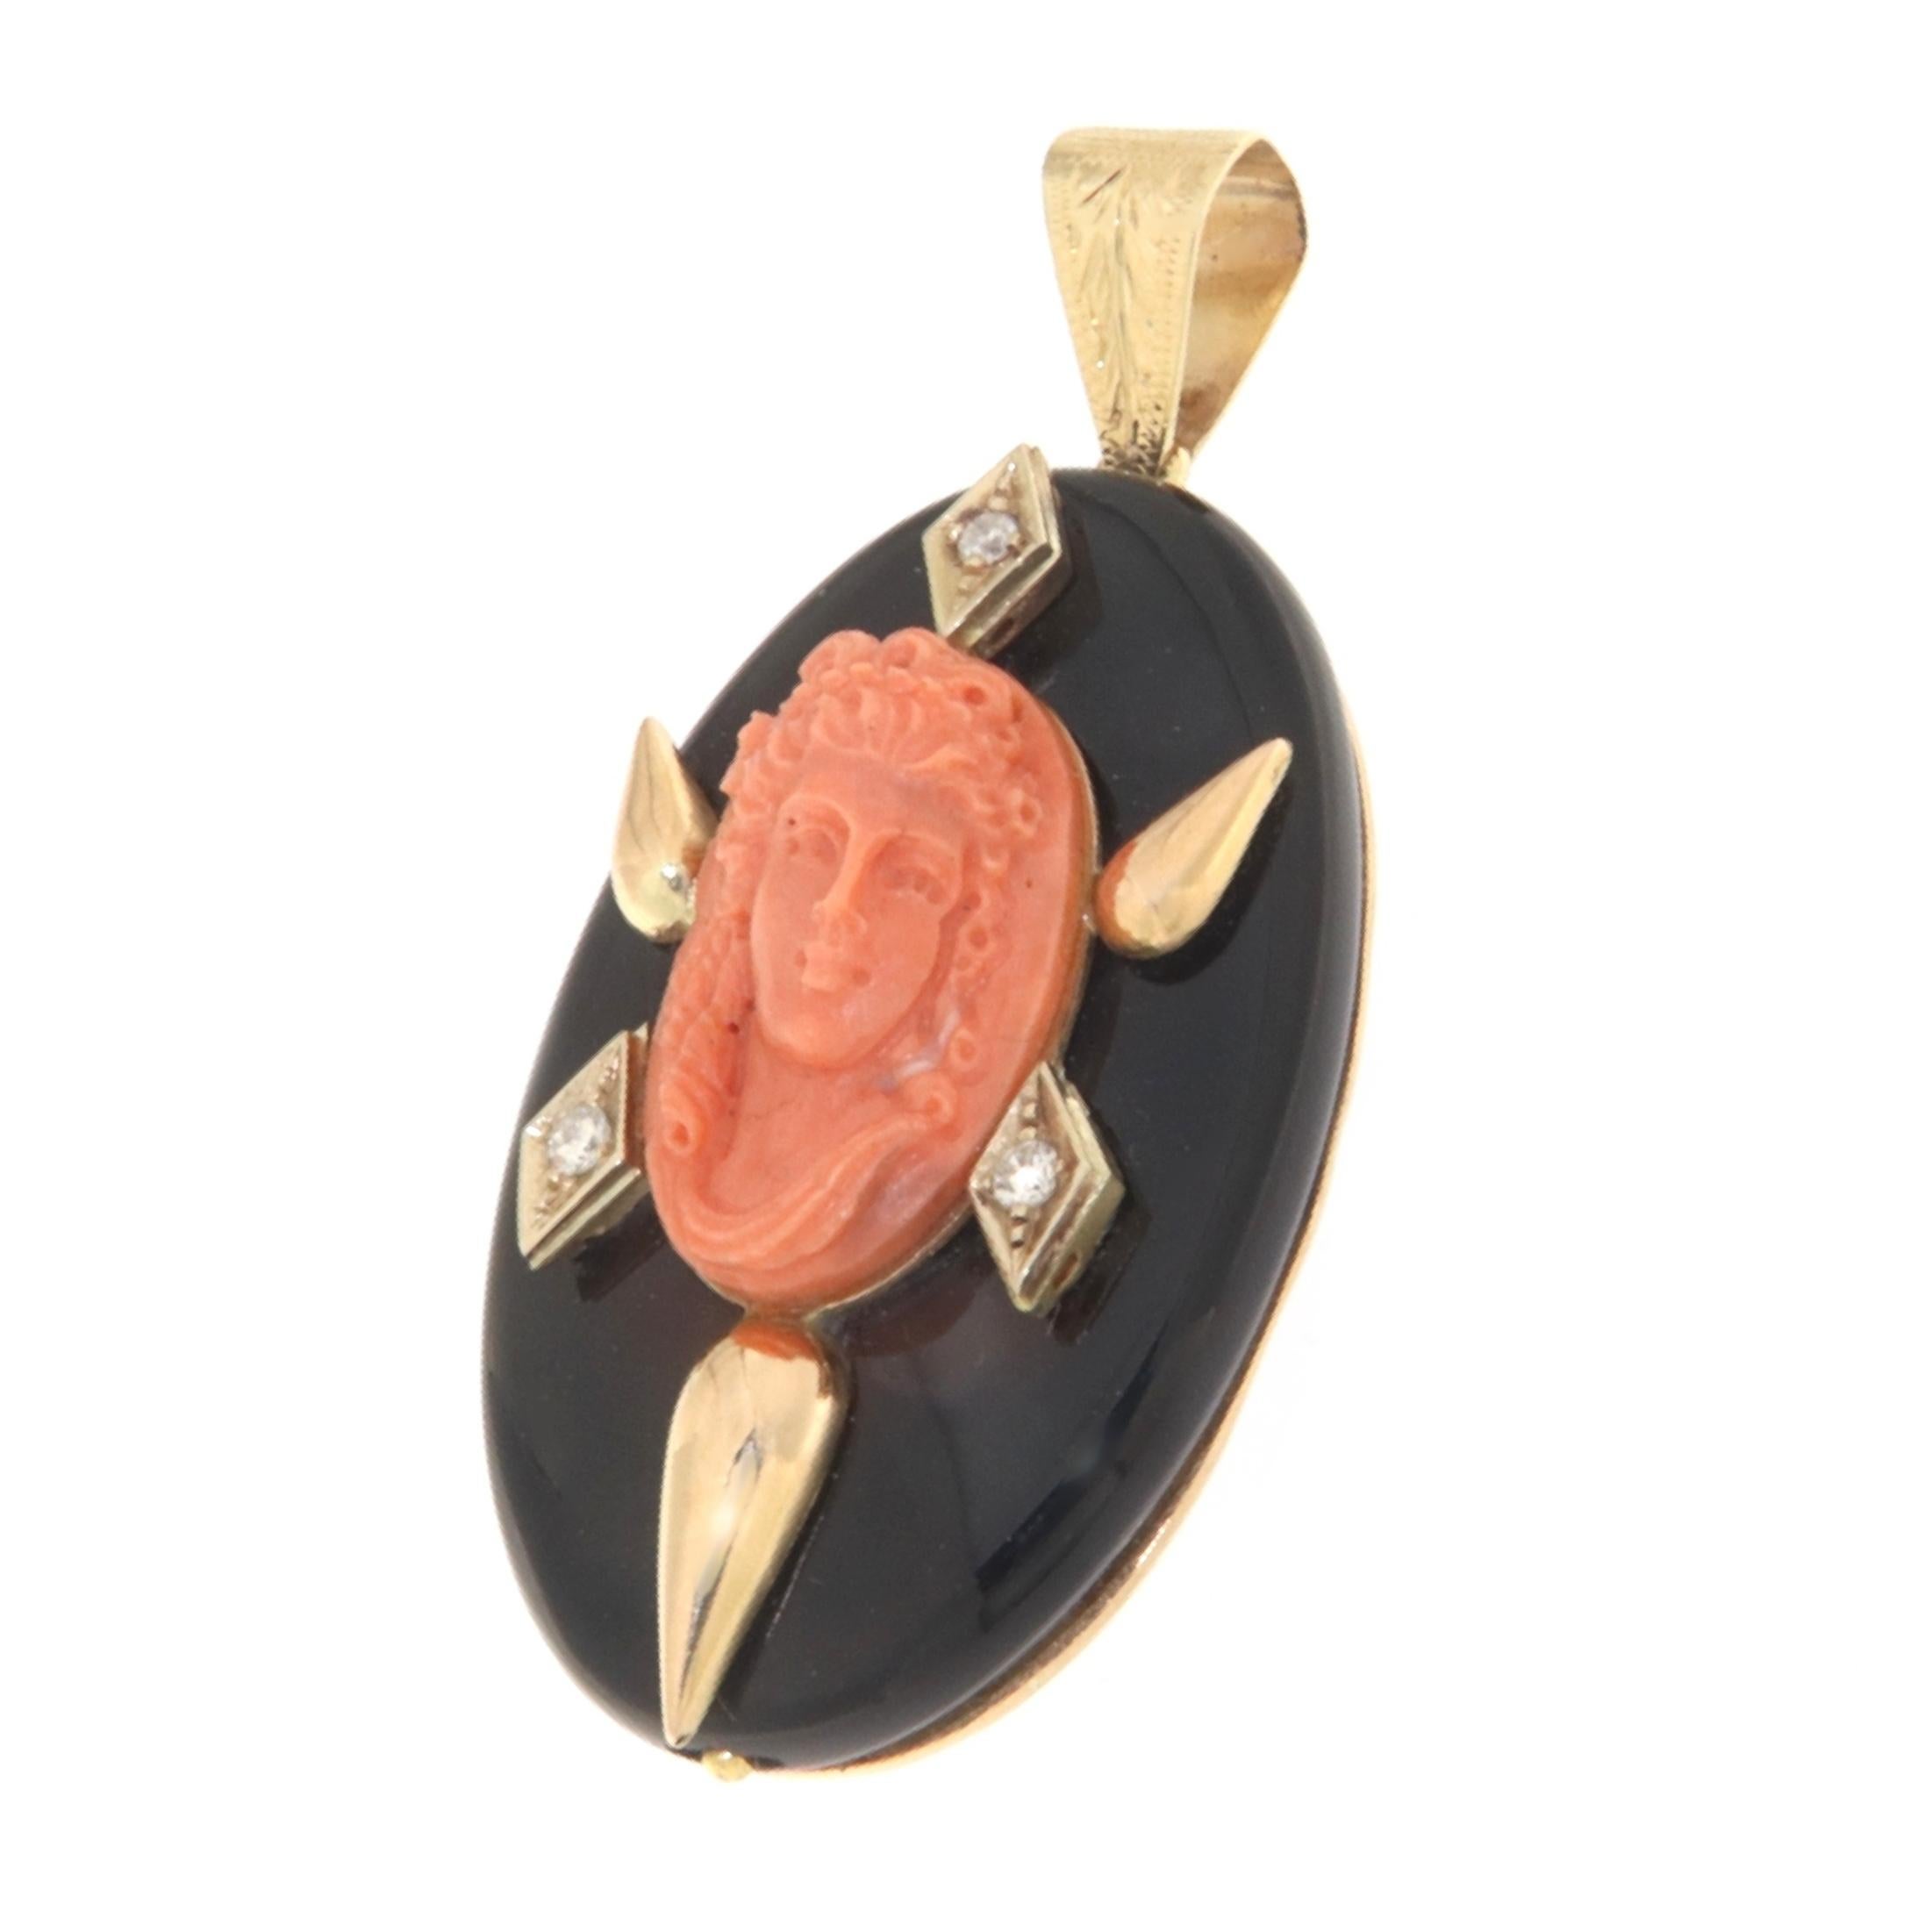 This 14-karat yellow gold pendant is a stunning display of classical elegance and contemporary finesse. It features a beautifully carved coral woman's face, a traditional cameo that exudes timeless grace. The cameo is set against a sleek, round onyx